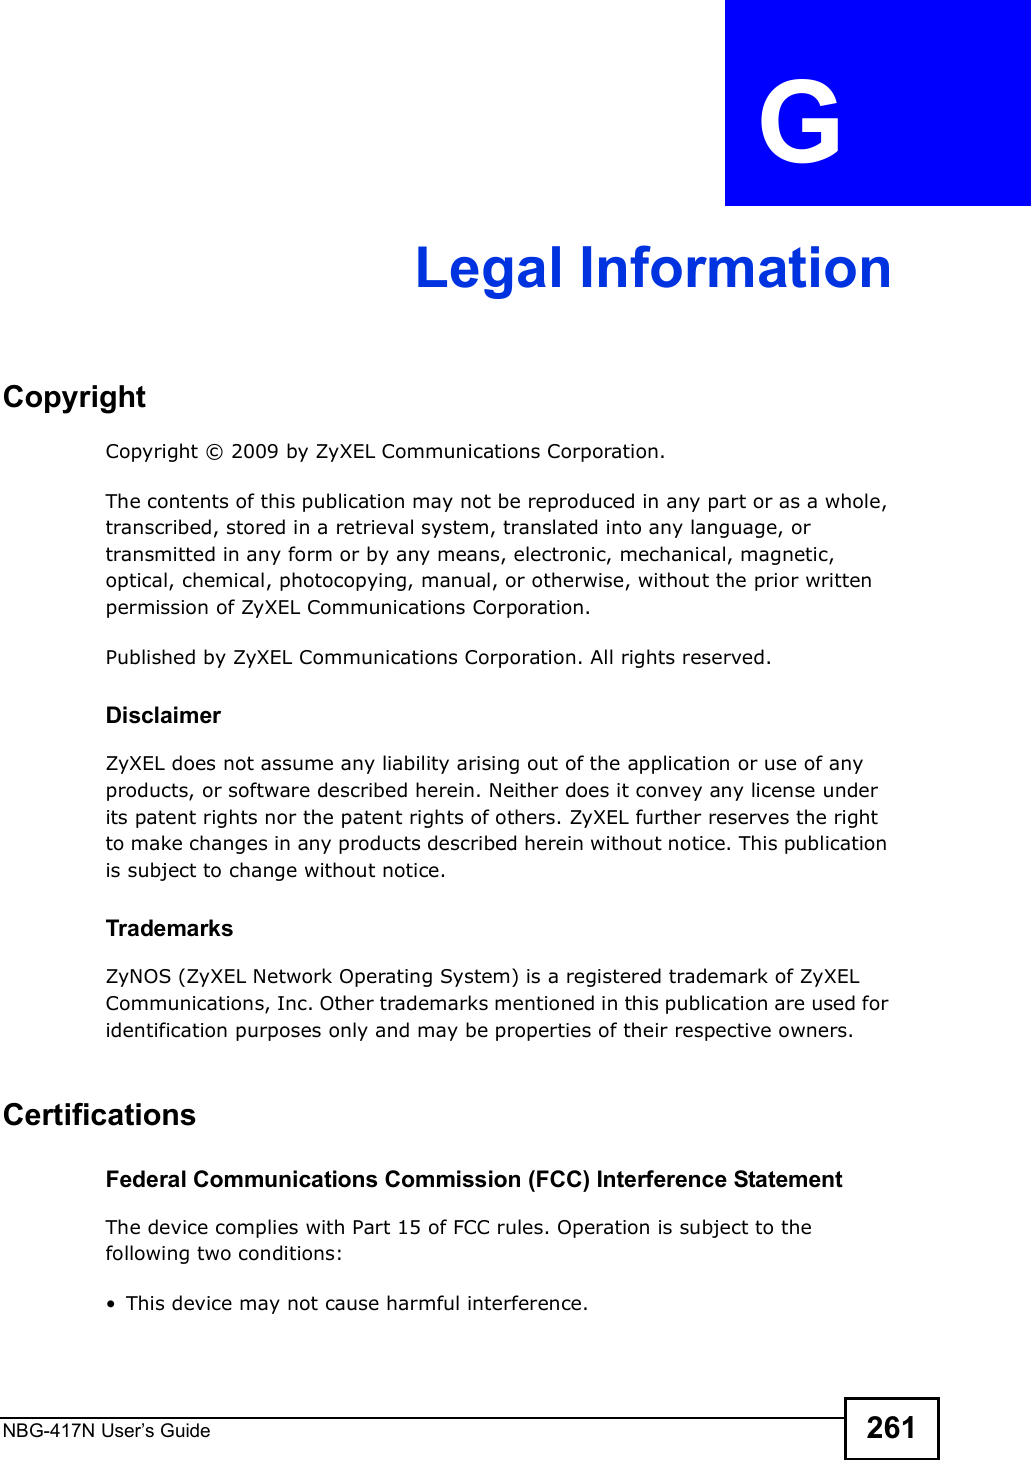 NBG-417N User s Guide 261APPENDIX  G Legal InformationCopyrightCopyright © 2009 by ZyXEL Communications Corporation.The contents of this publication may not be reproduced in any part or as a whole, transcribed, stored in a retrieval system, translated into any language, or transmitted in any form or by any means, electronic, mechanical, magnetic, optical, chemical, photocopying, manual, or otherwise, without the prior written permission of ZyXEL Communications Corporation.Published by ZyXEL Communications Corporation. All rights reserved.DisclaimerZyXEL does not assume any liability arising out of the application or use of any products, or software described herein. Neither does it convey any license under its patent rights nor the patent rights of others. ZyXEL further reserves the right to make changes in any products described herein without notice. This publication is subject to change without notice.TrademarksZyNOS (ZyXEL Network Operating System) is a registered trademark of ZyXEL Communications, Inc. Other trademarks mentioned in this publication are used for identification purposes only and may be properties of their respective owners.Certifications Federal Communications Commission (FCC) Interference StatementThe device complies with Part 15 of FCC rules. Operation is subject to the following two conditions: This device may not cause harmful interference.